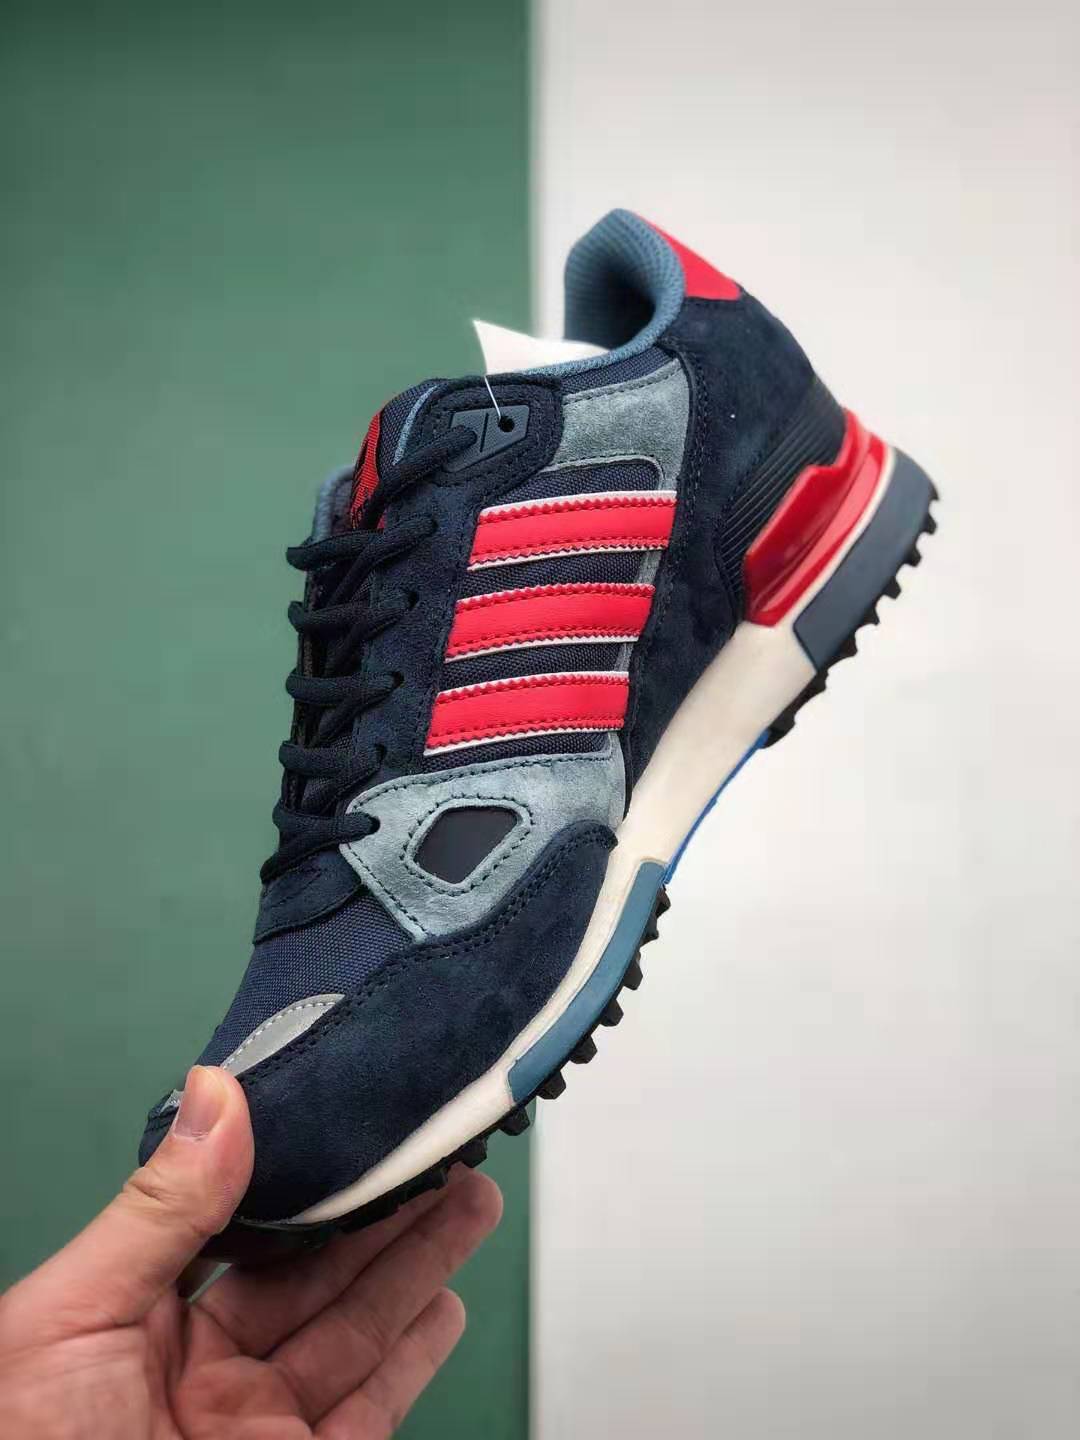 Adidas ZX 750 Navy Black Red M18260 - Stylish Sneakers for Sporty Men